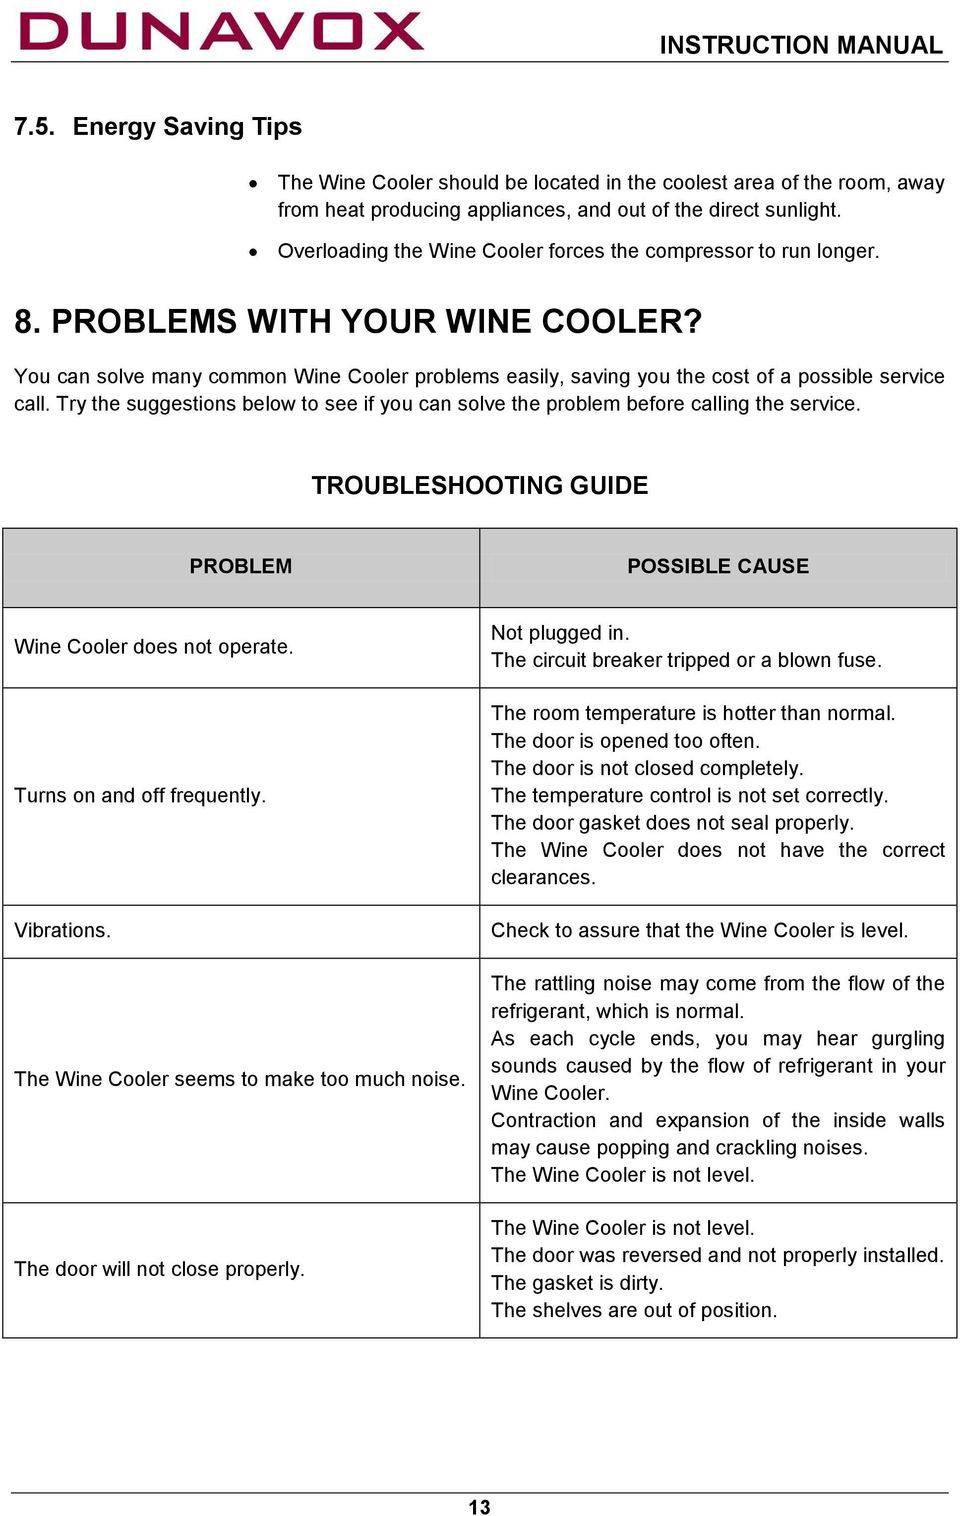 You can solve many common Wine Cooler problems easily, saving you the cost of a possible service call. Try the suggestions below to see if you can solve the problem before calling the service.